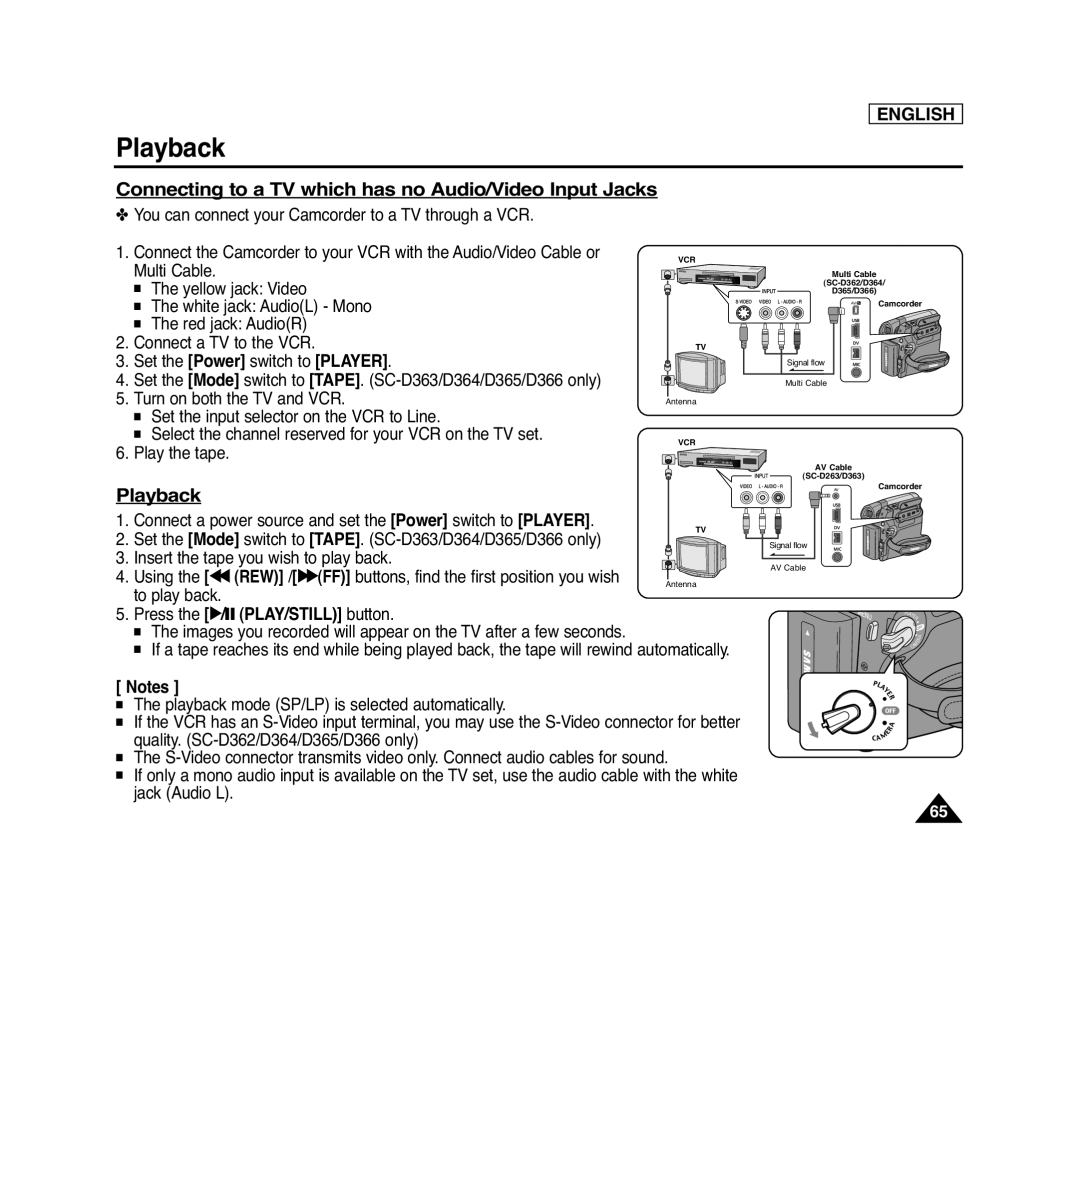 Samsung SC-D366, SC-D263, SC-D364, SC-D362 manual Connecting to a TV which has no Audio/Video Input Jacks, Playback, English 